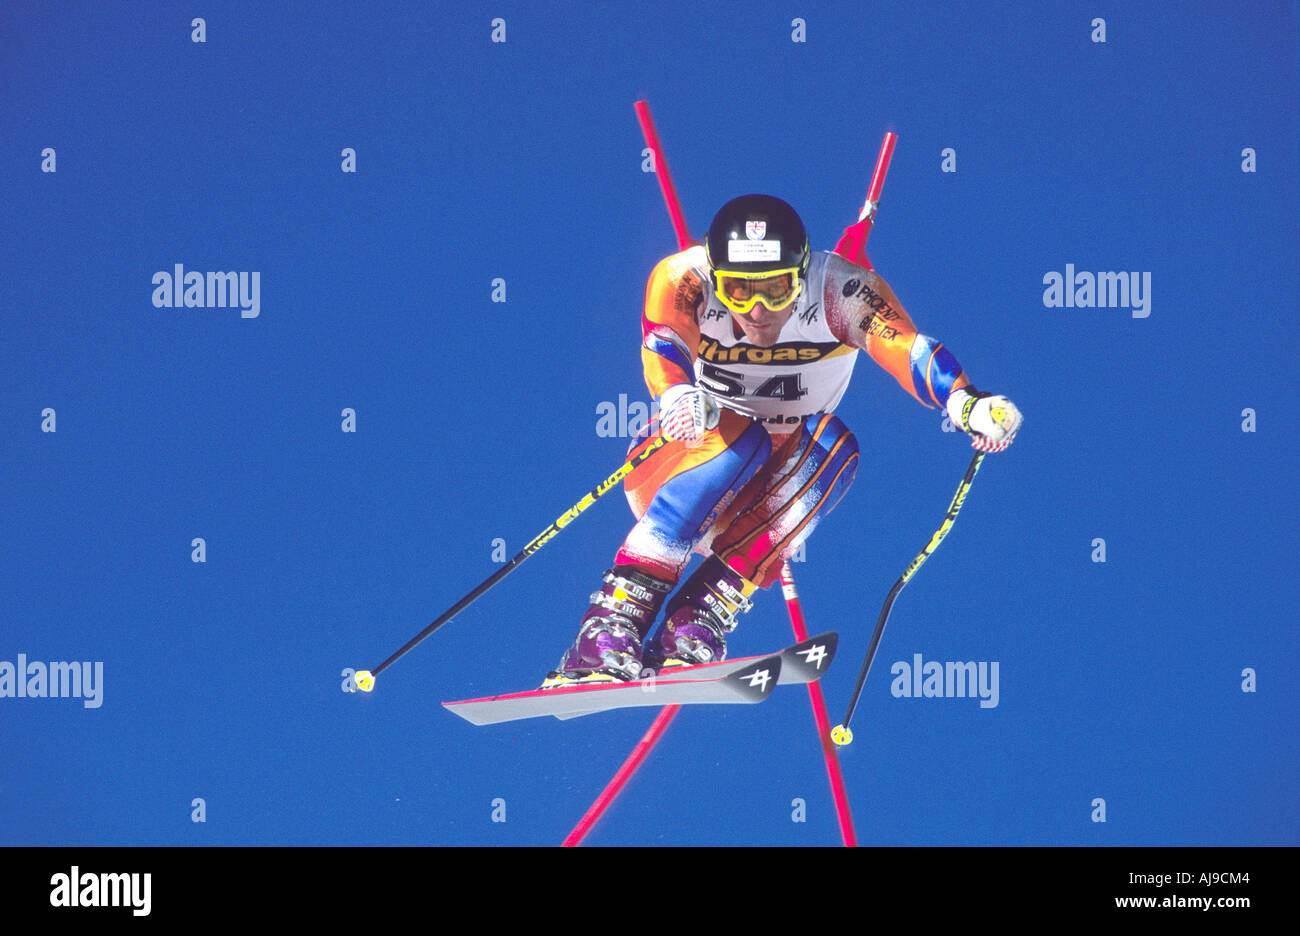 Ski racer in air over jump flashes past race flag Stock Photo